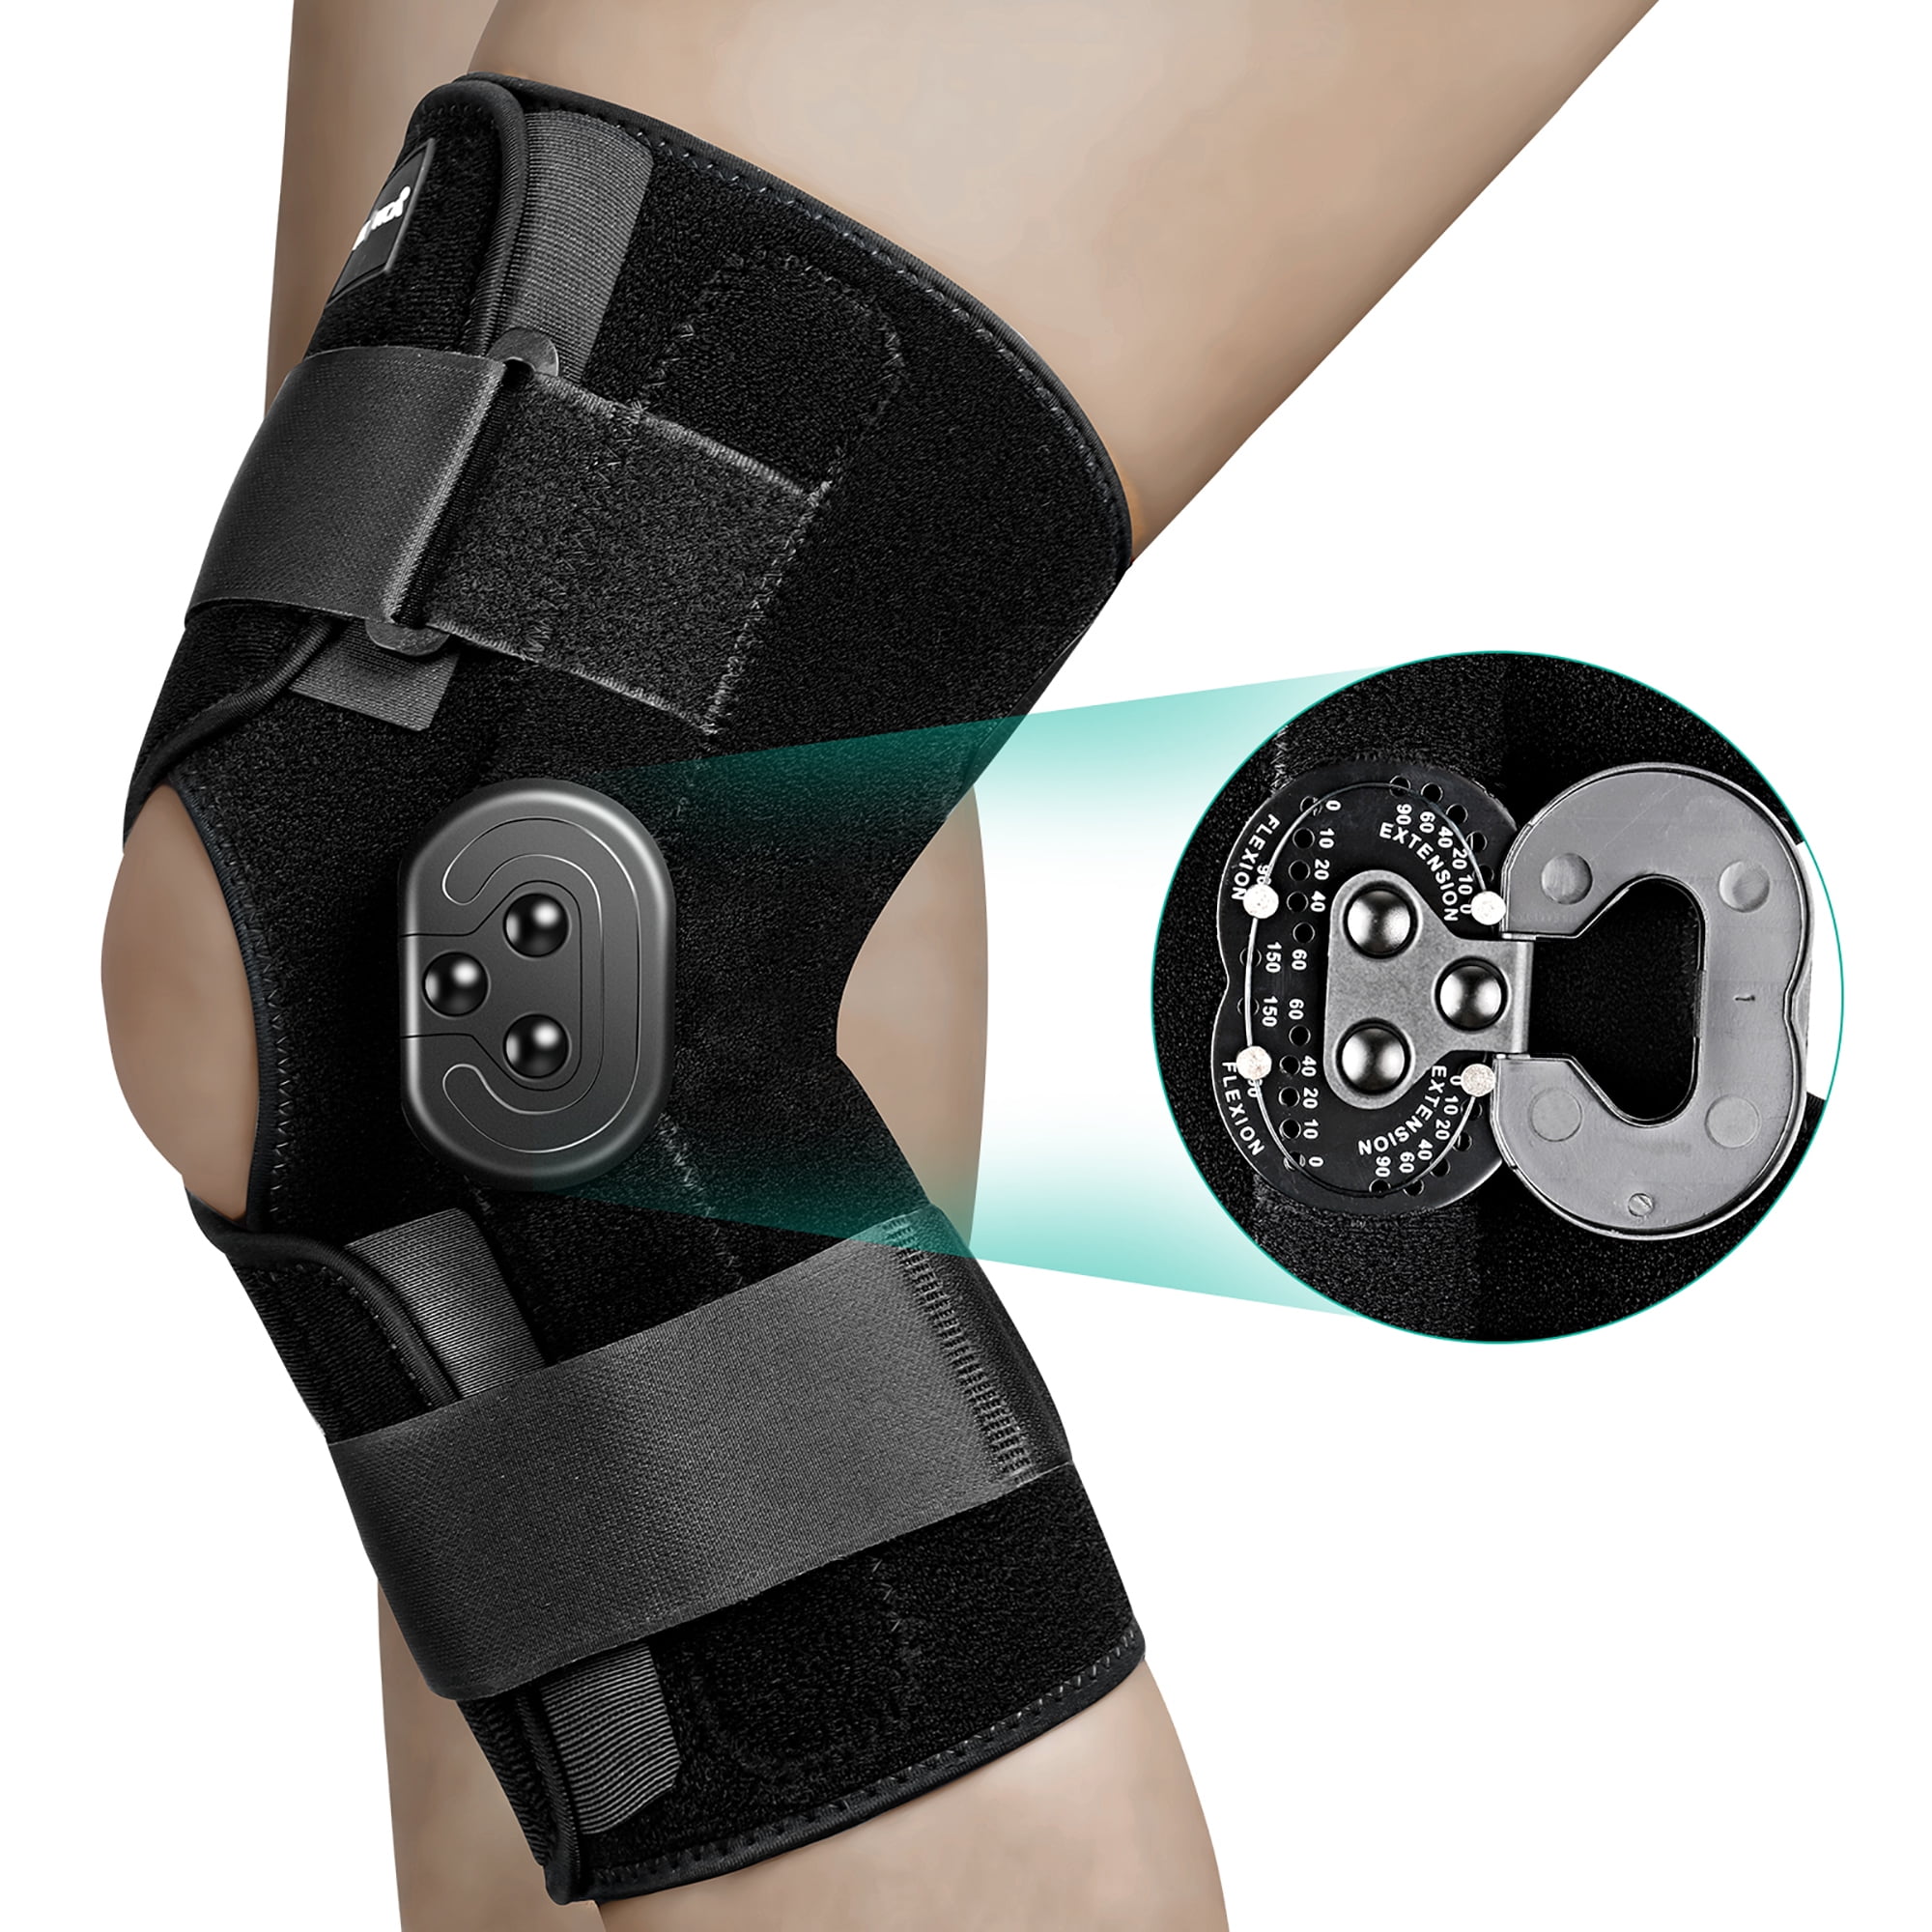 Shock Doctor Ultra Knee Support w/ Bilateral Hinges